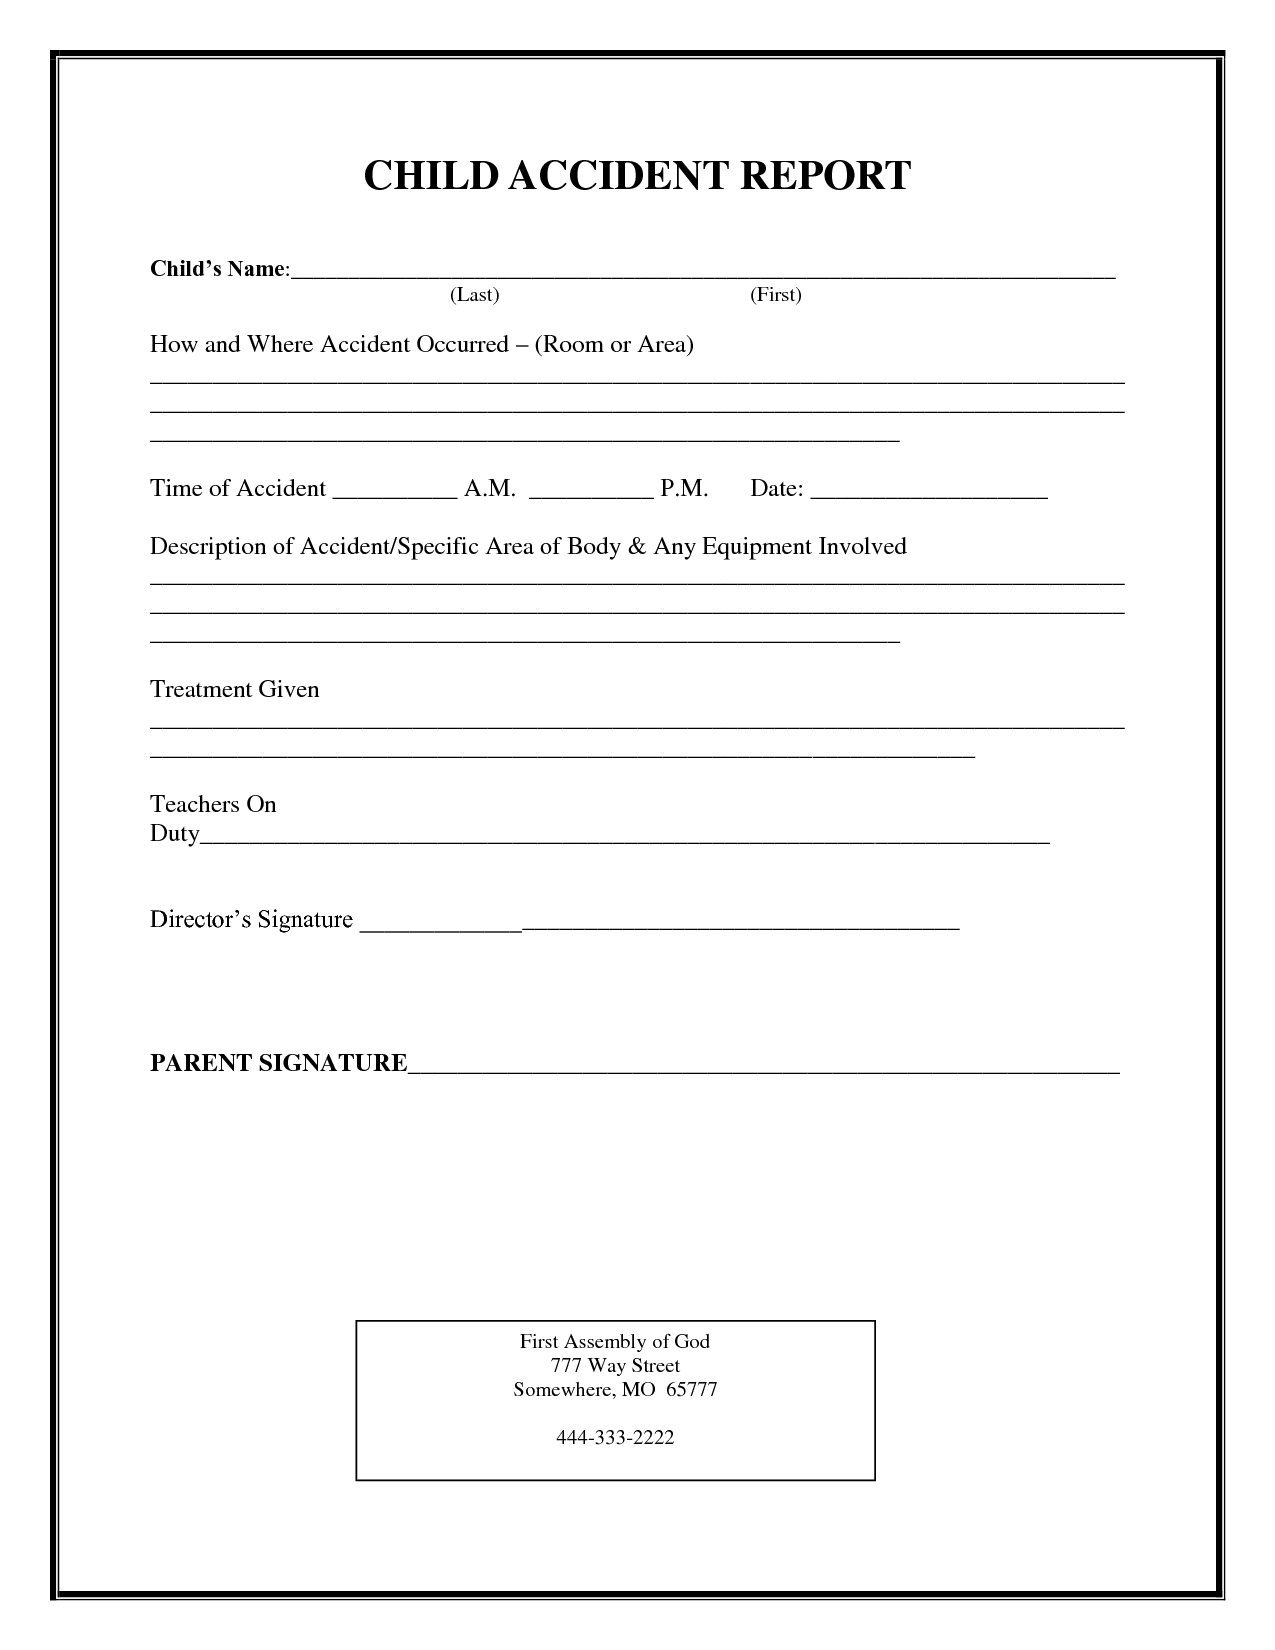 Incident Report Form Child Care | Child Accident Report With Regard To Incident Report Form Template Qld